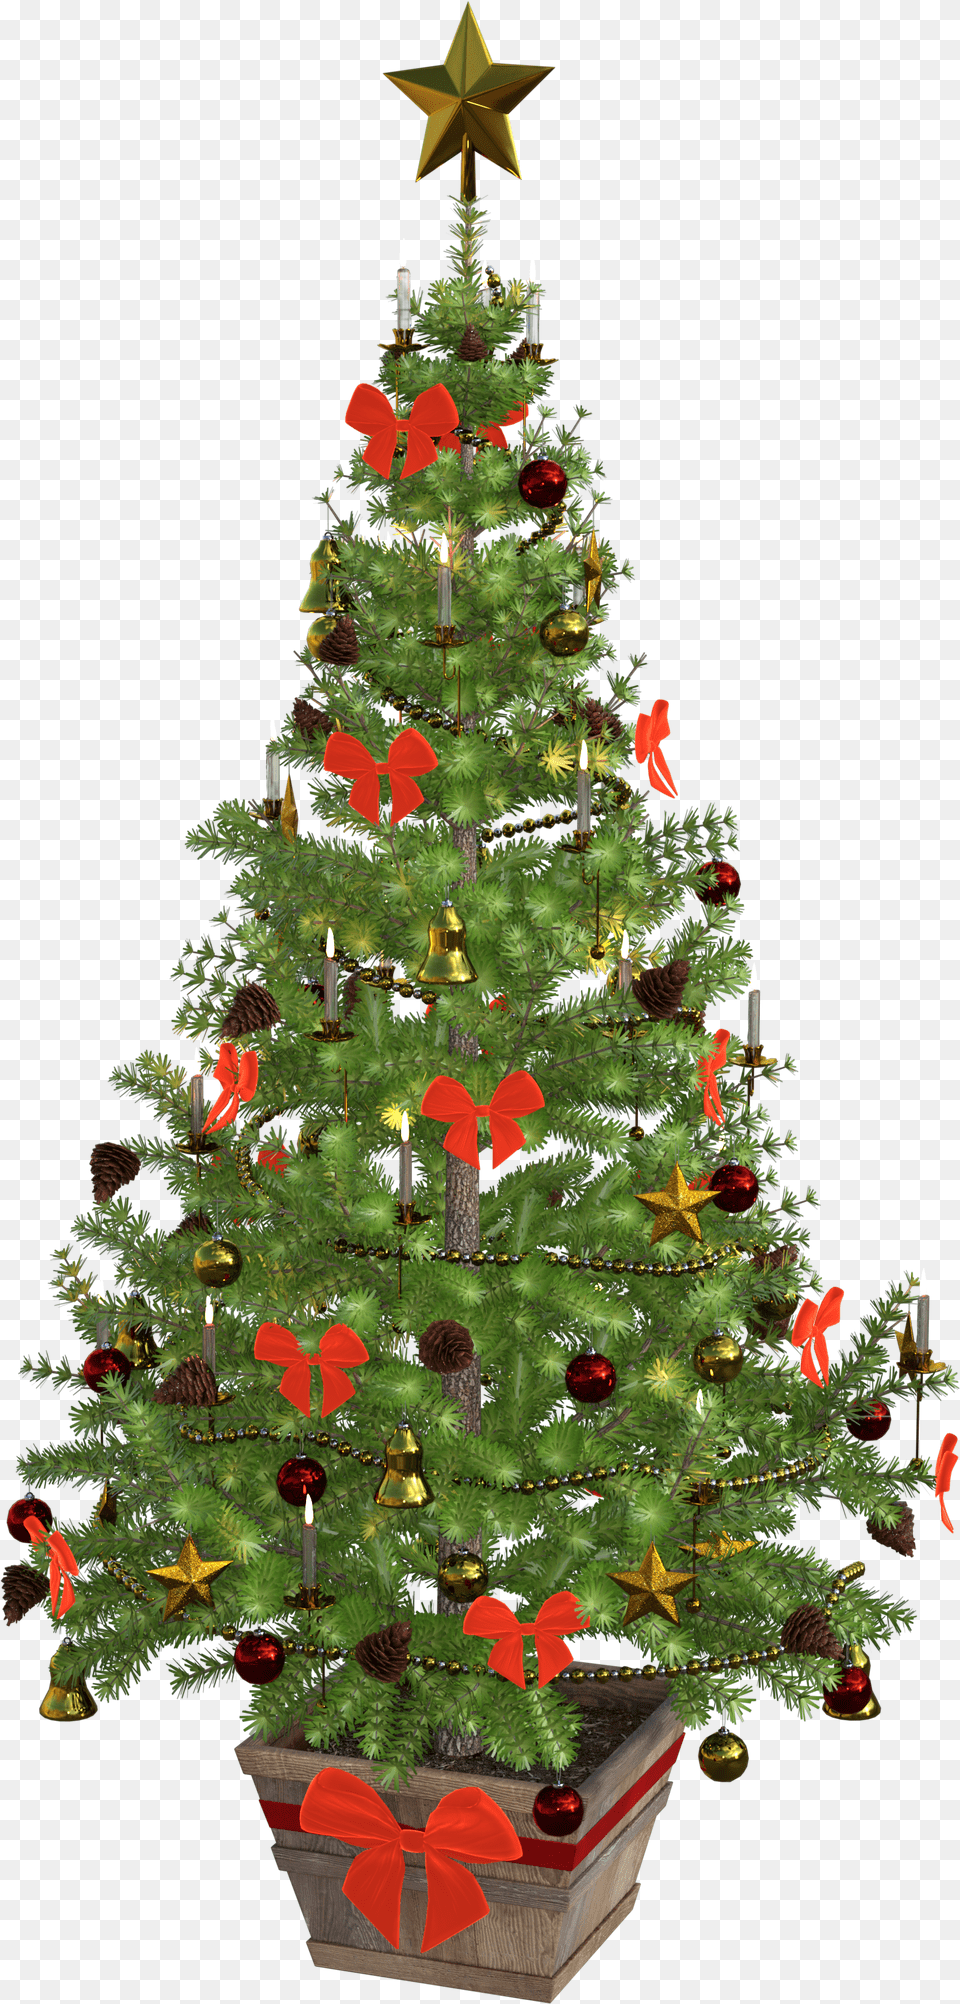 Christmas Tree Background Images Small Christmas Tree With Lights And Decorations Free Transparent Png